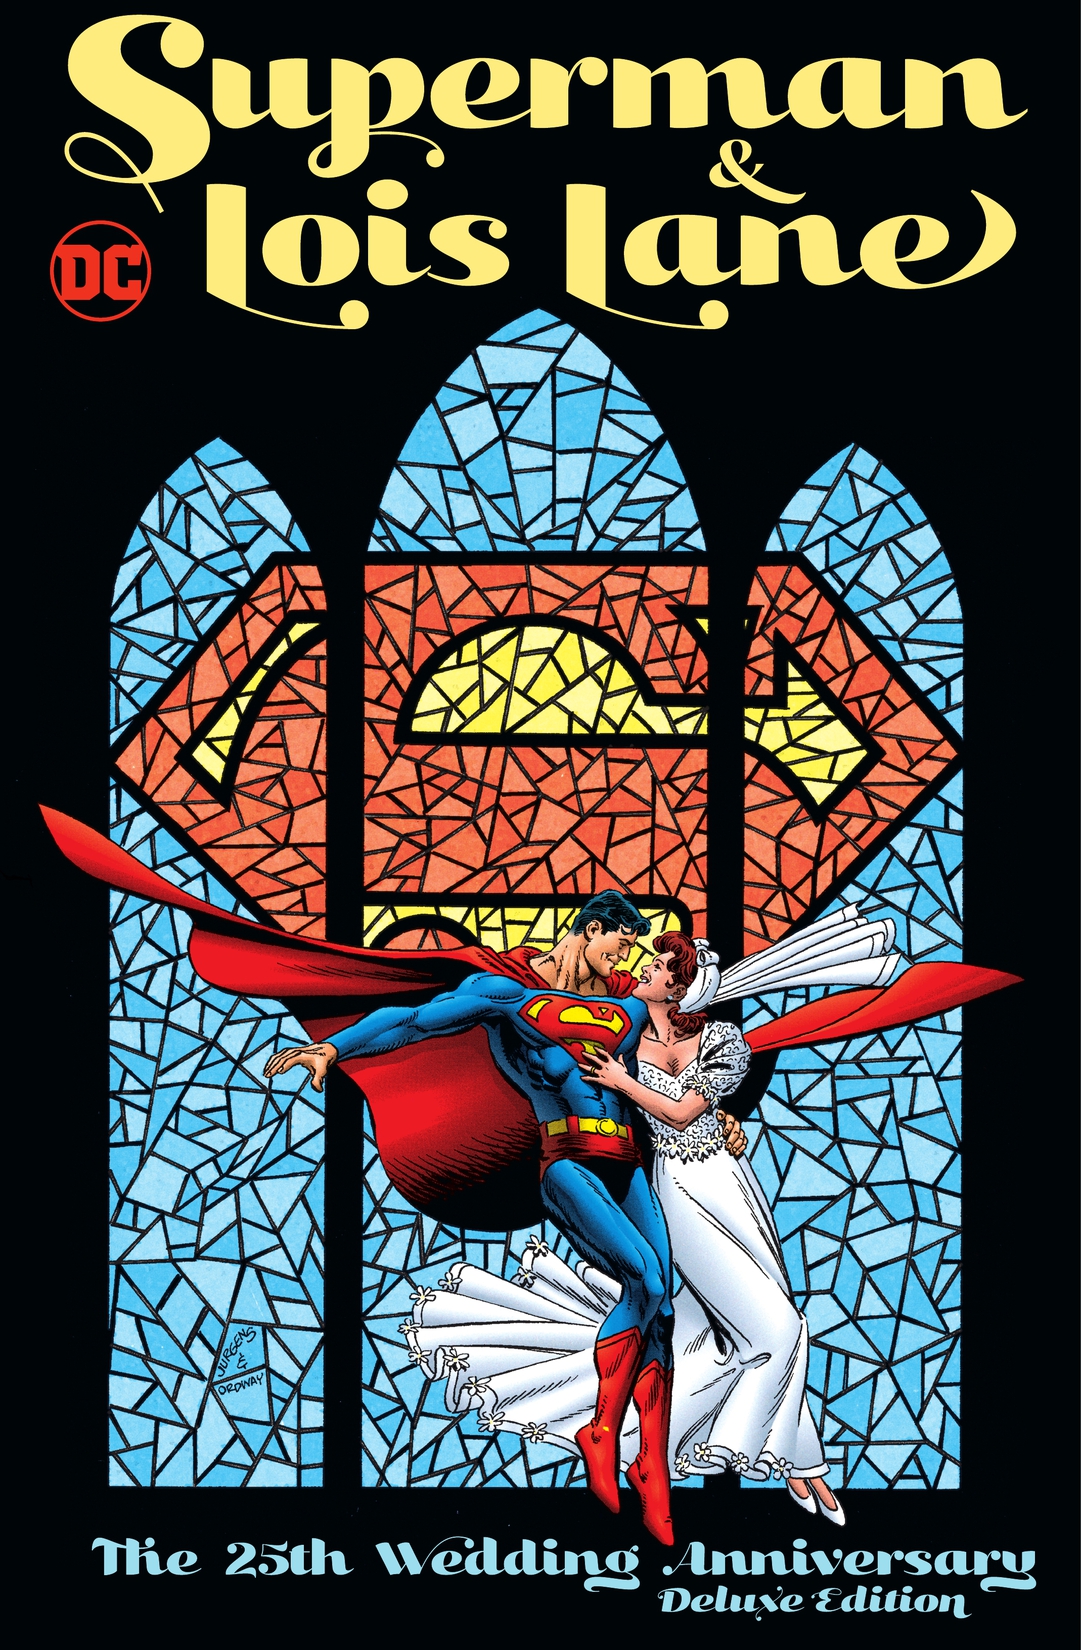 Superman & Lois Lane: The 25th Wedding Anniversary Deluxe Edition preview images